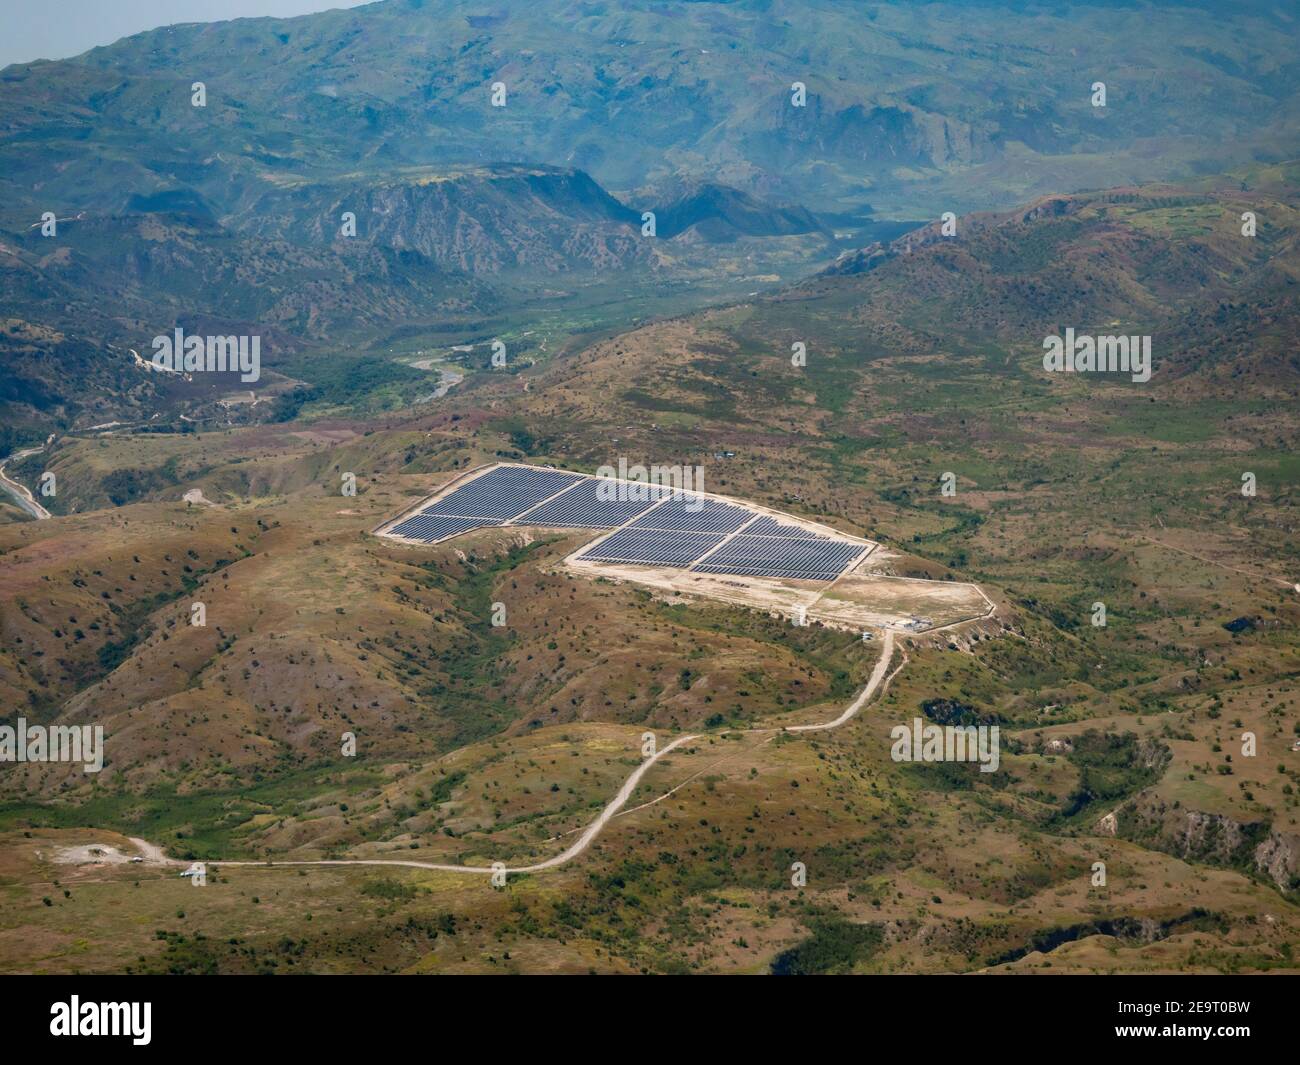 20 MW solar power plant on the hills above Tambler, General Santos City, South Cotabato Province on Mindanao, the Philippines. Stock Photo